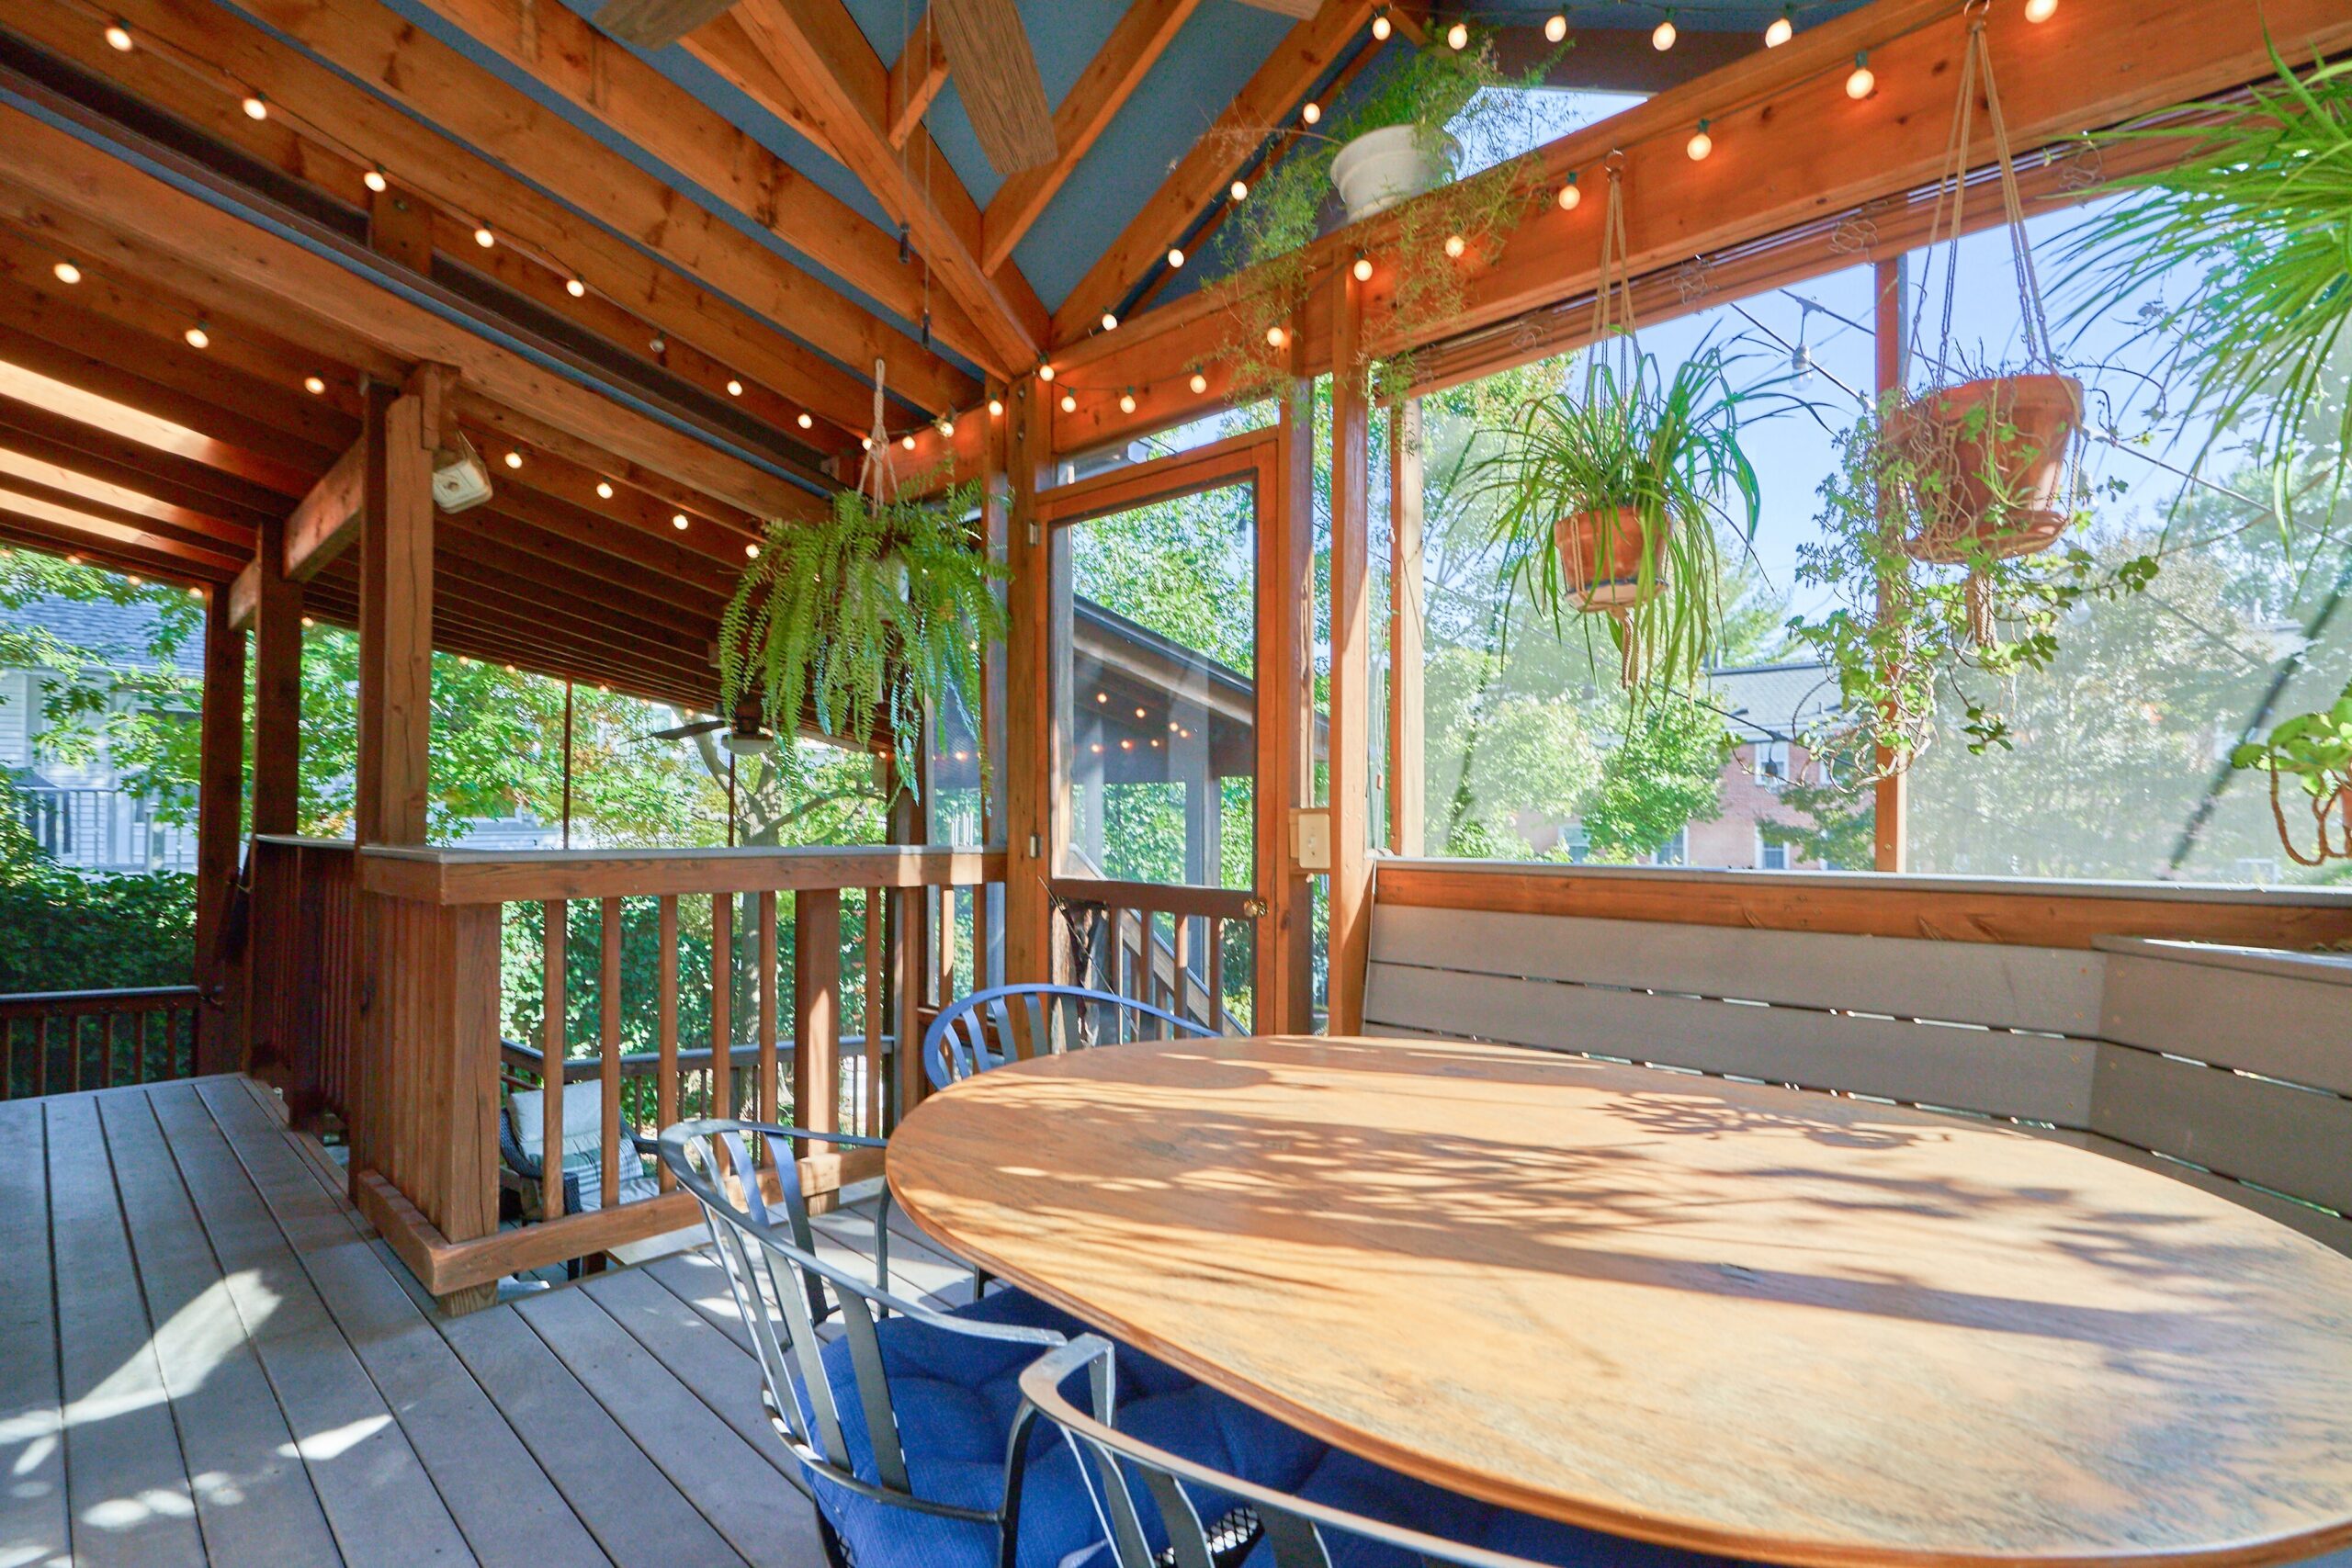 Professional exterior photo of 15 N Fenwick Street - showing the top tier deck screened porch